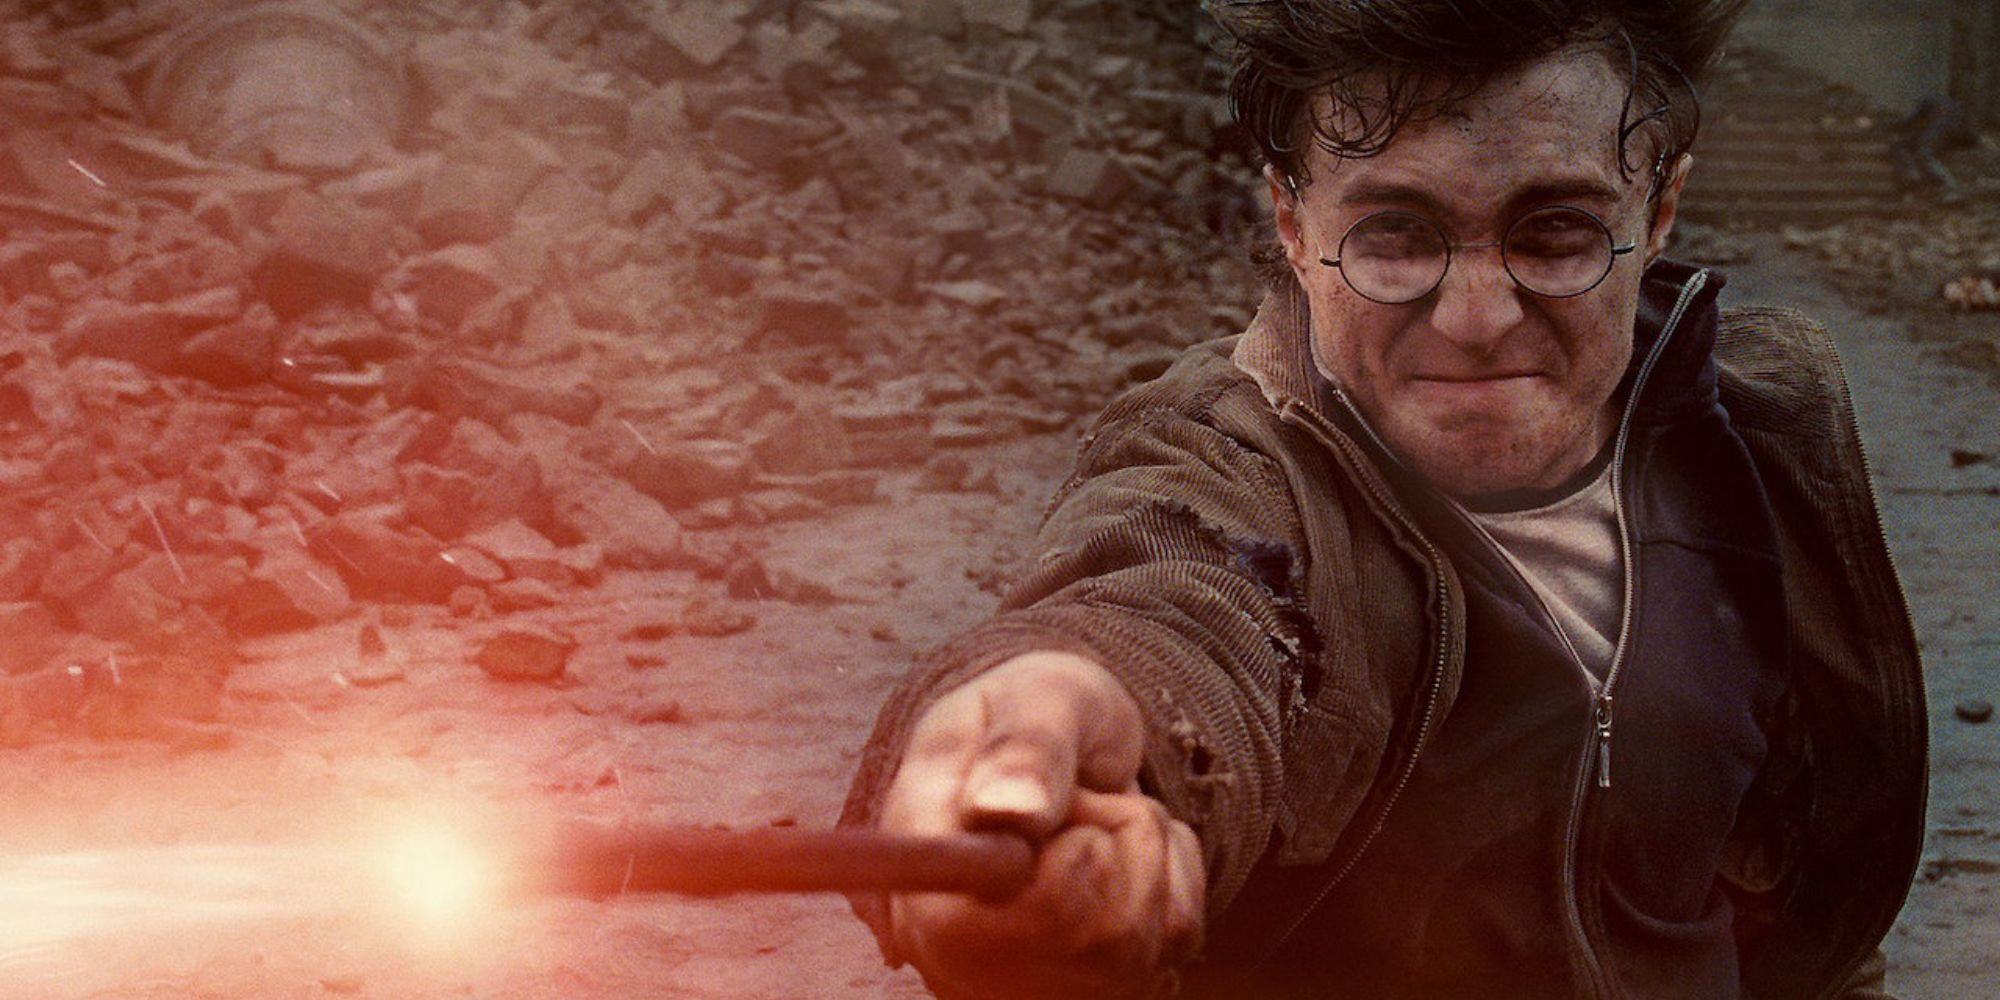 Harry Potter and the Deathly Hallows Part 2 Bleeding Harry Using Spells